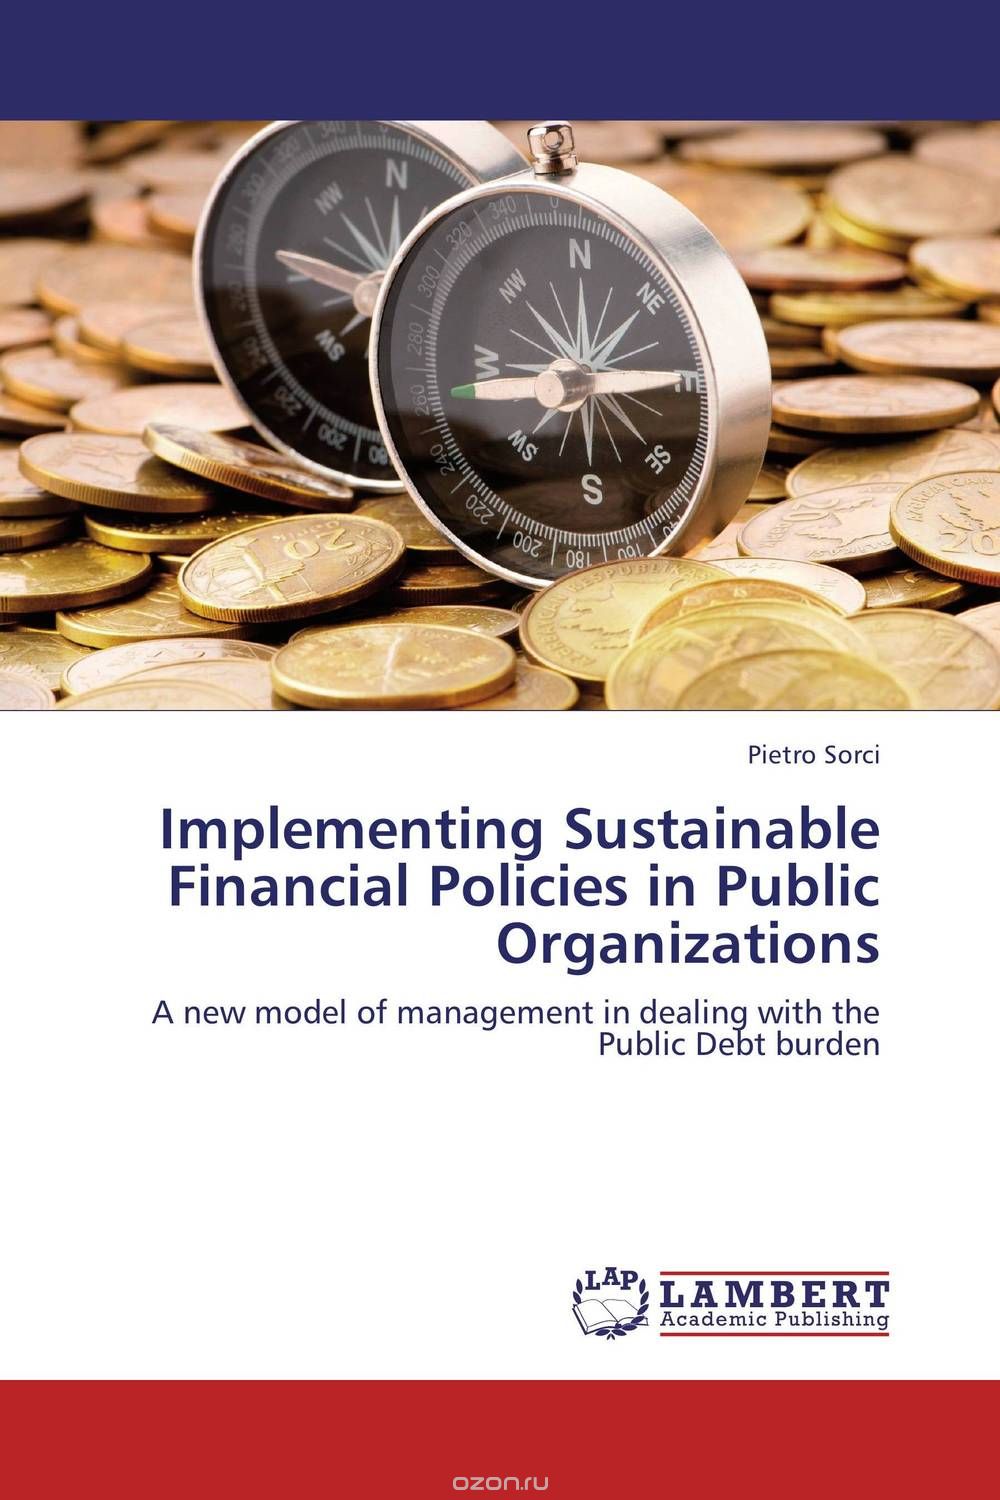 Implementing Sustainable Financial Policies in Public Organizations